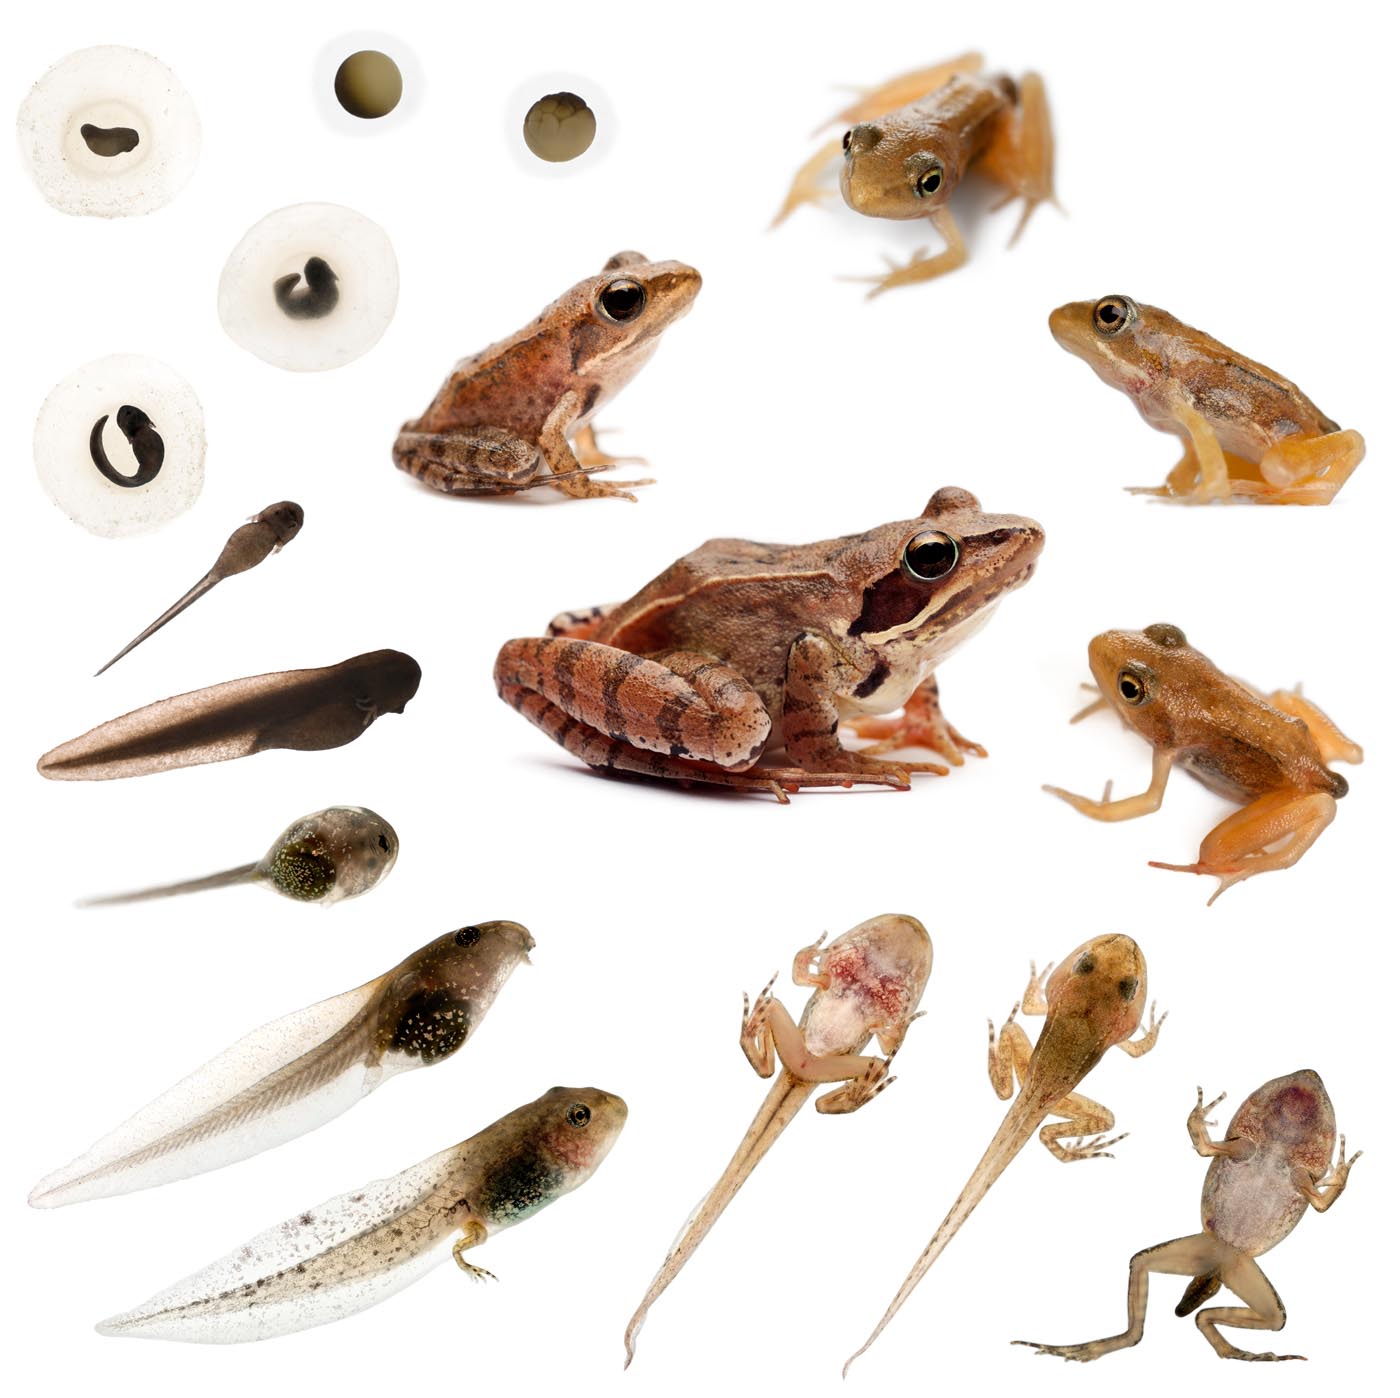 Composition of the complete evolution of a Common frog in front of a white background